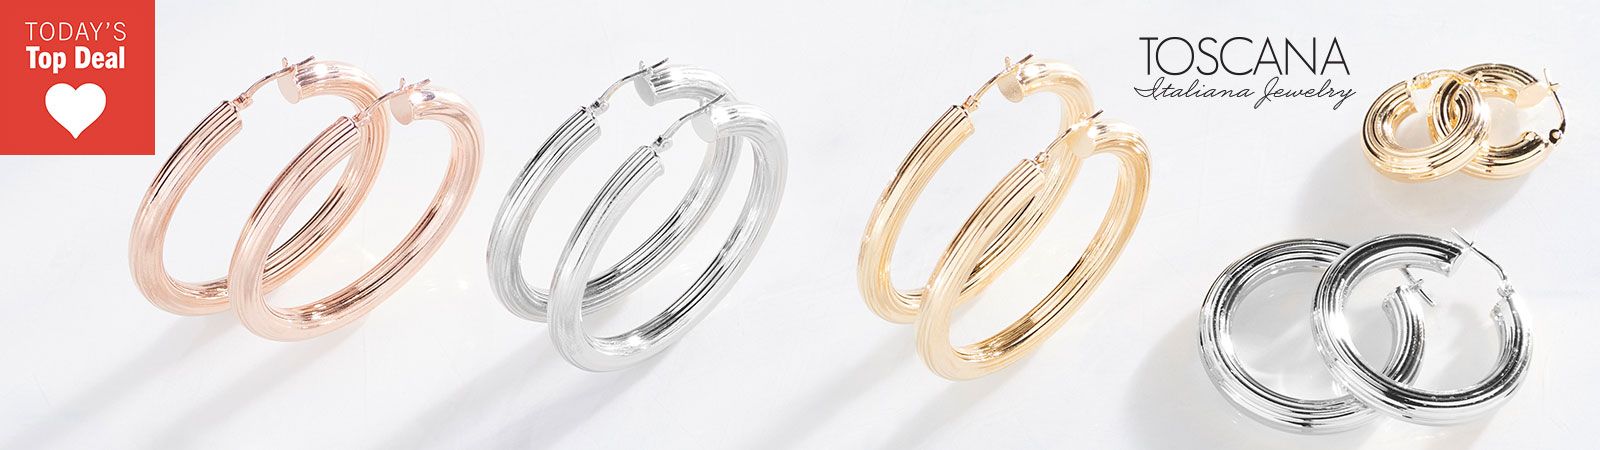 213-264 Toscana Italiana Gold or Platinum Plated Rigato Round Tubing Hoop Earrings